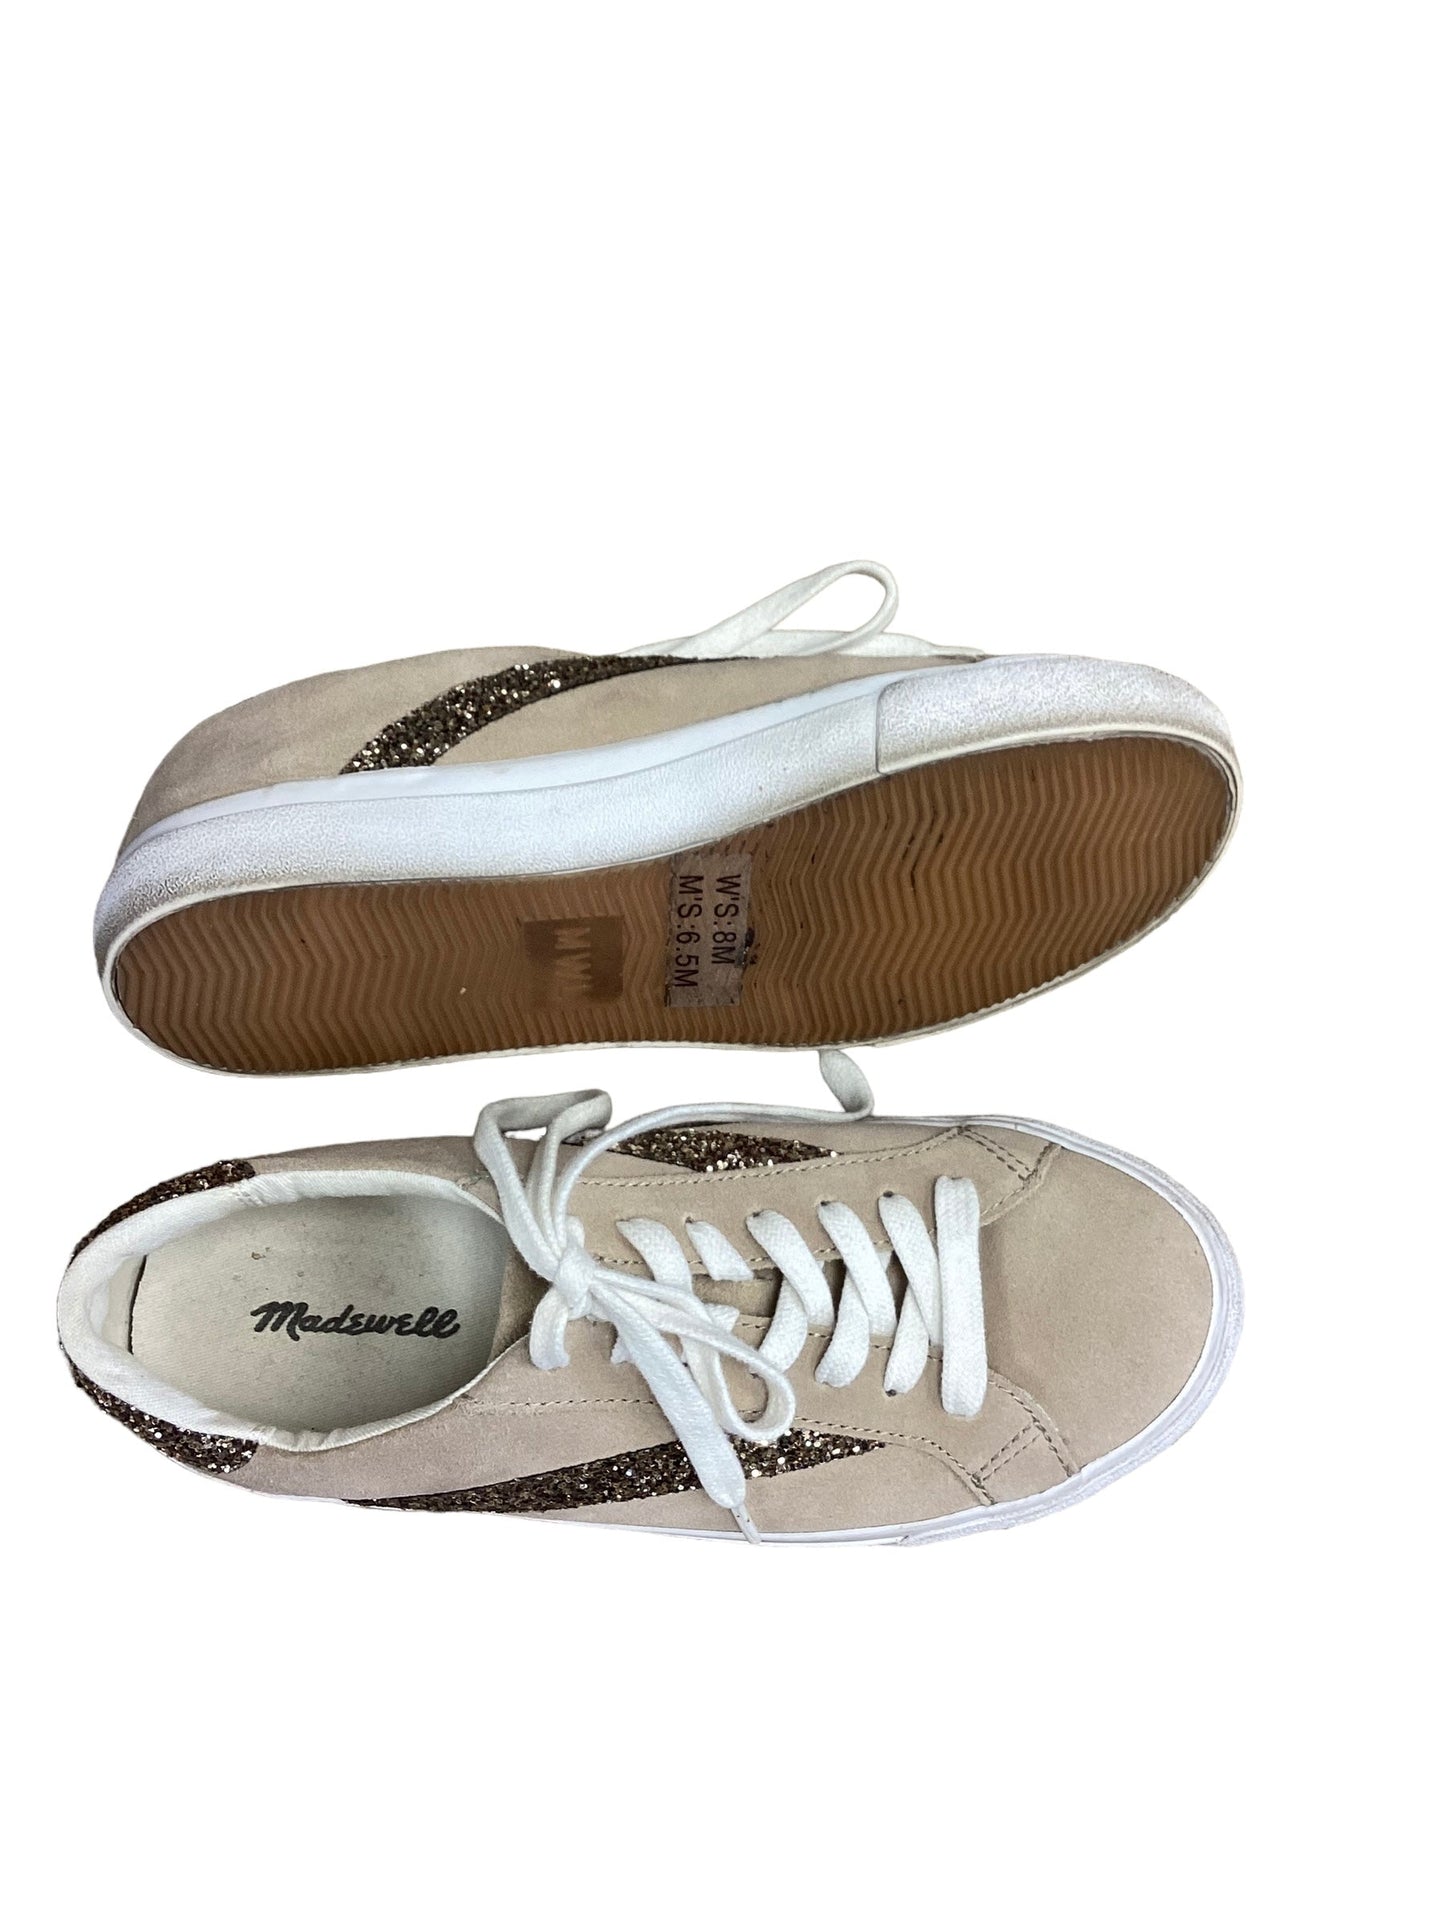 Brown Shoes Sneakers Madewell, Size 8